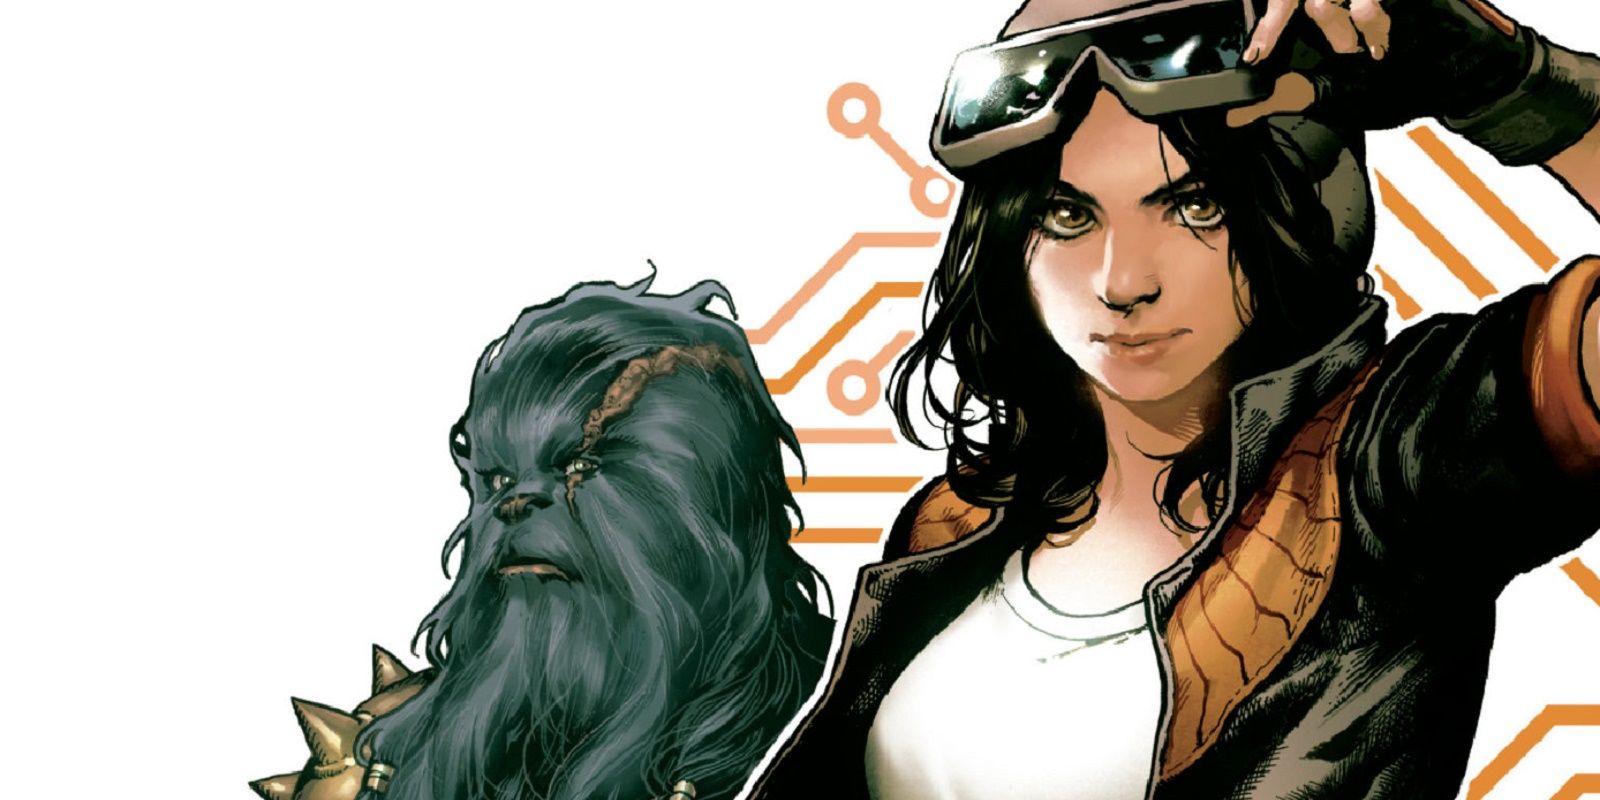 Cover of Doctor Aphra run-off Star Wars comic with Aphra and Black Krranstan 